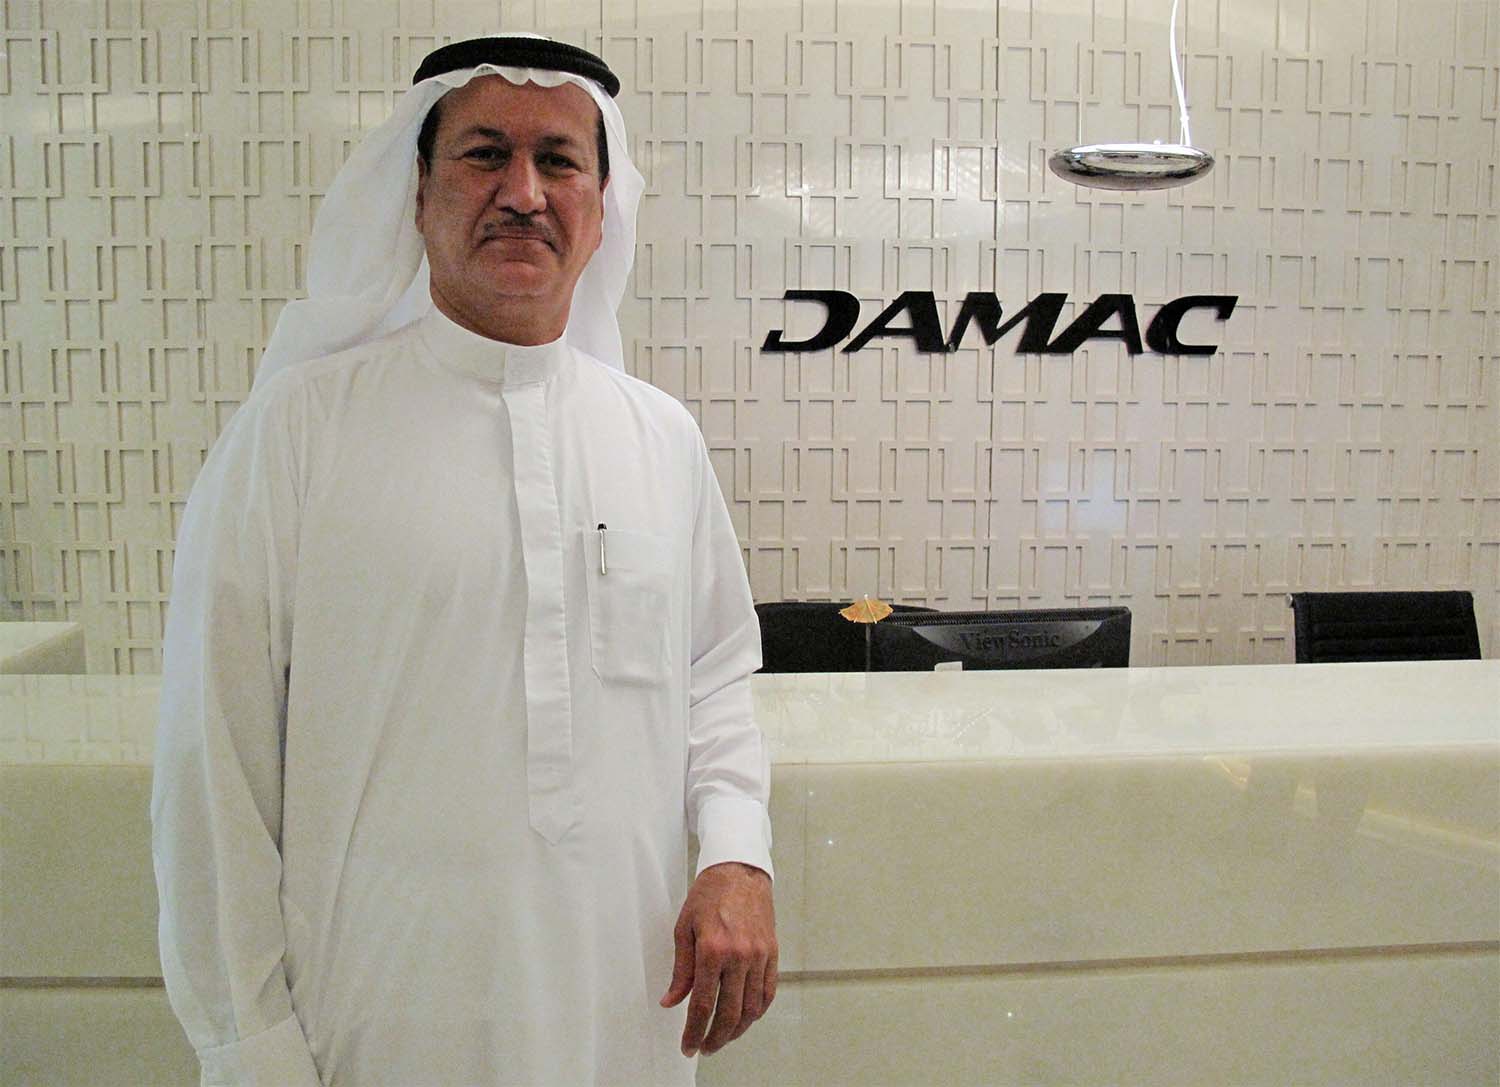 DAMAC is known in Dubai for a development that features a Trump-branded golf club surrounded by villas and apartments